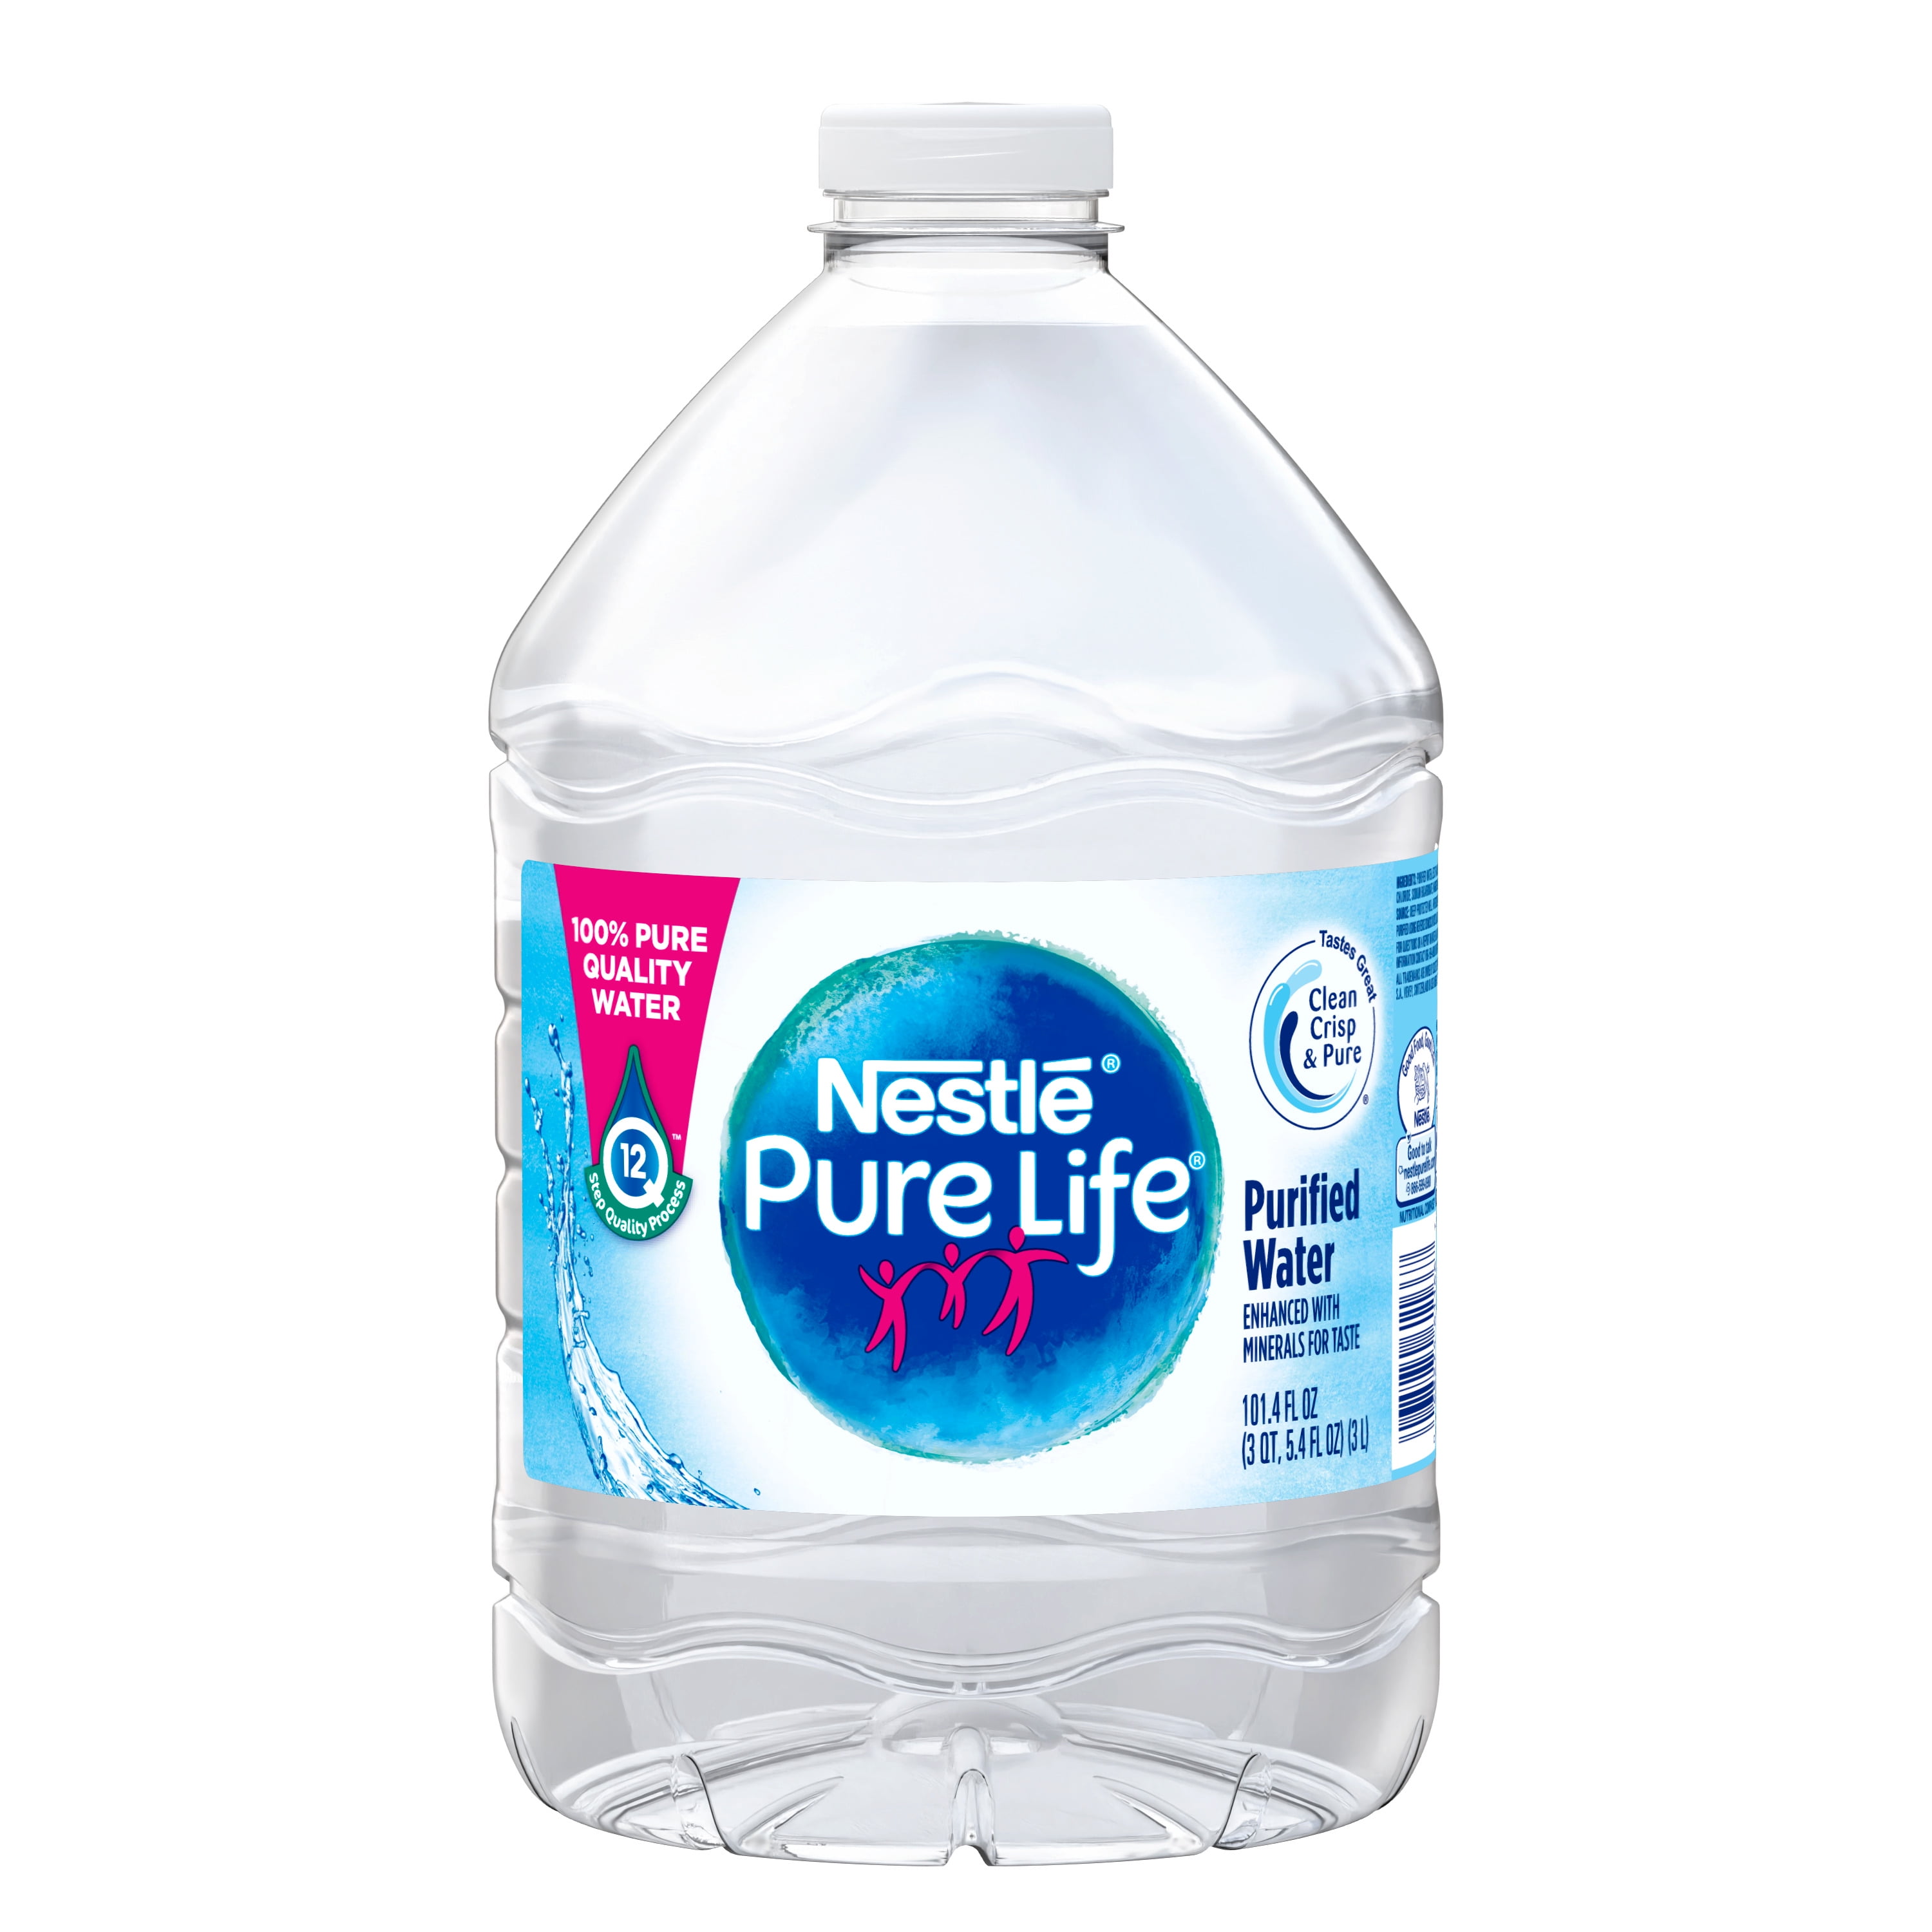 what is the density of pure water